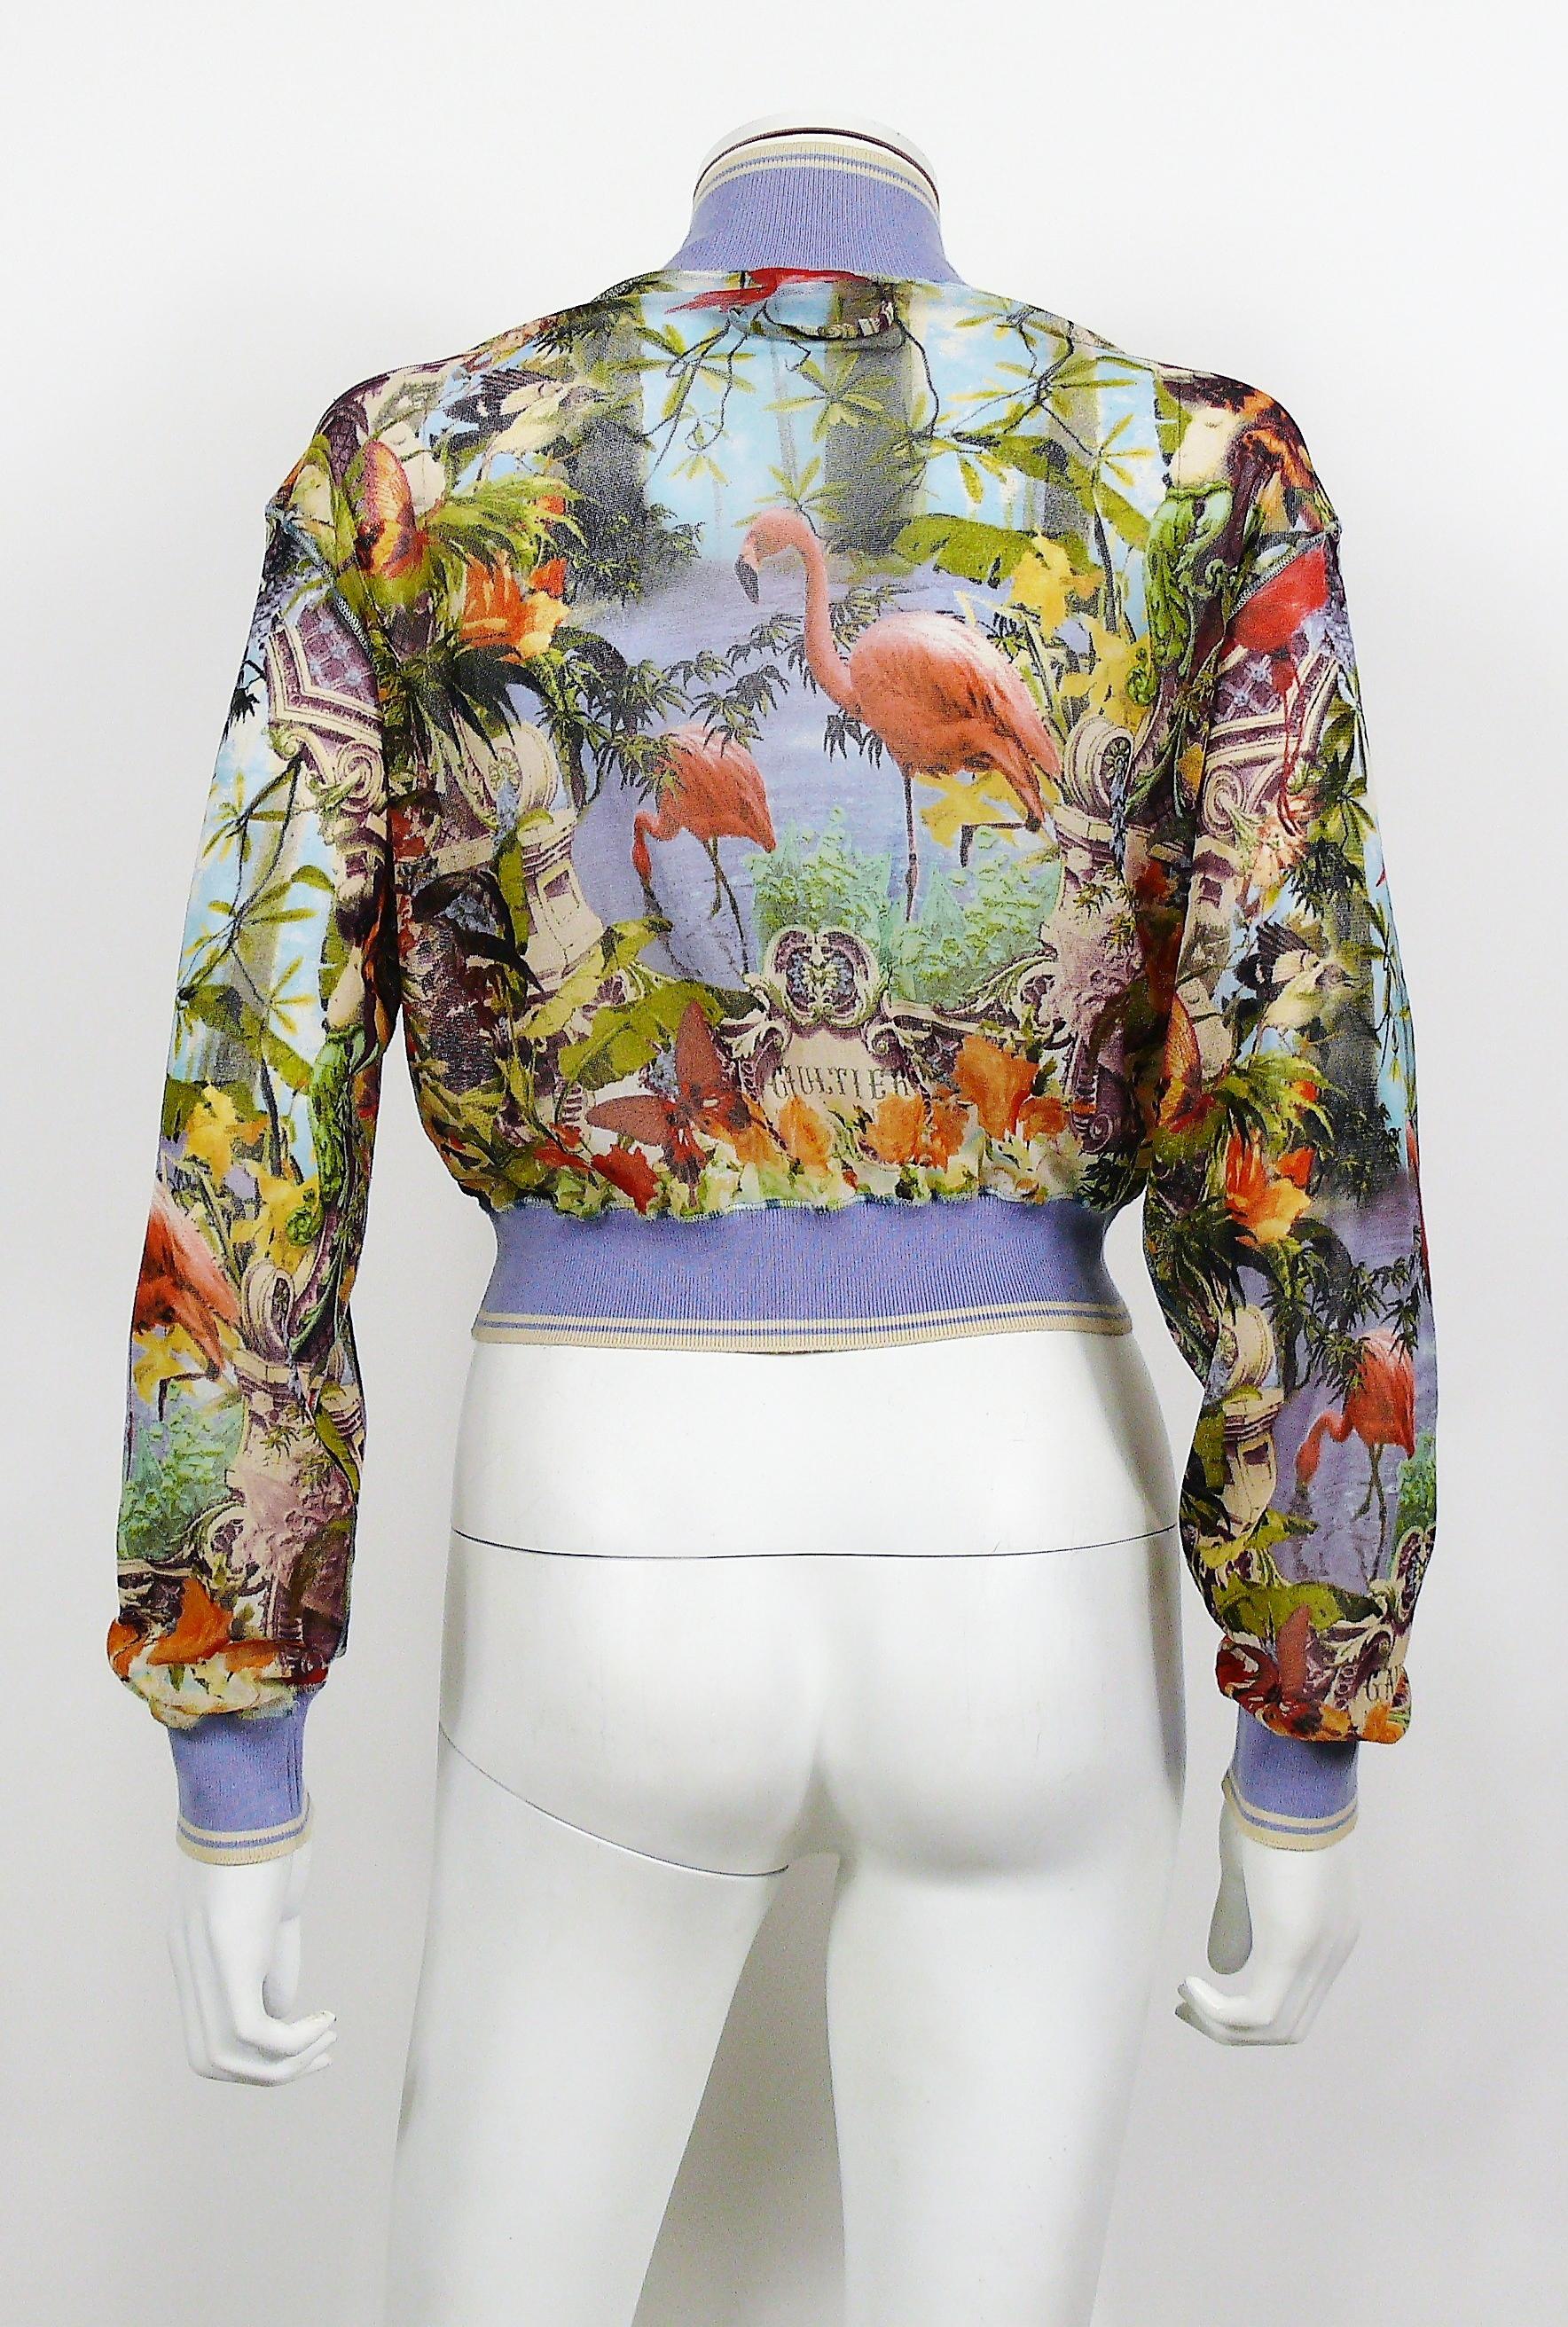 Women's Jean Paul Gaultier Vintage Tropical Print Sheer Cropped Bomber Jacket Size S